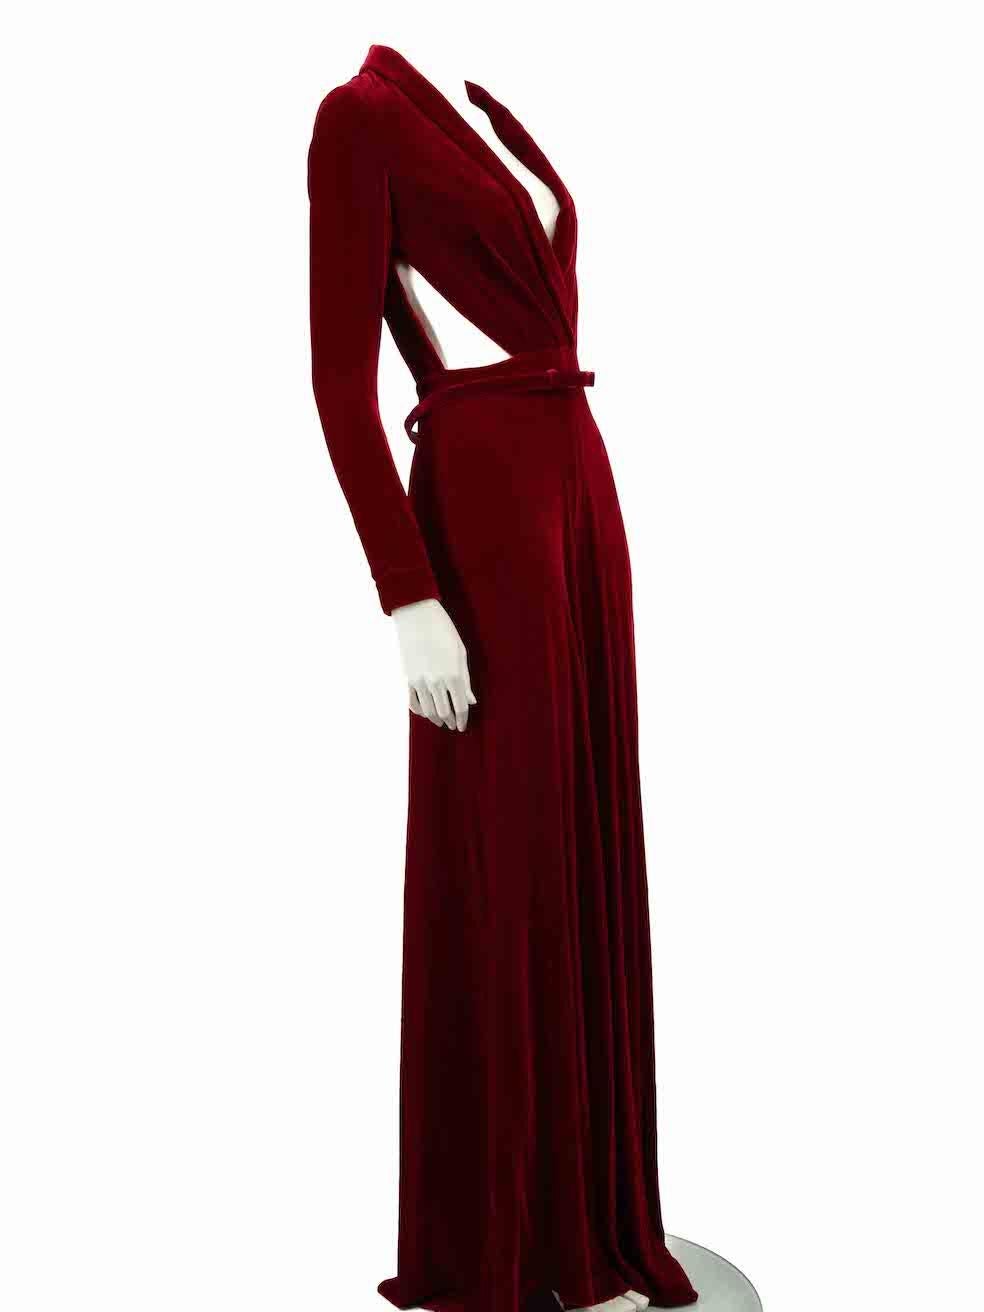 CONDITION is Very good. Minimal wear to jumpsuit is evident. Minimal wear to left underarm lining with discolouration on this used Honayda designer resale item.
 
 
 
 Details
 
 
 Red
 
 Velvet
 
 Jumpsuit
 
 Long sleeves
 
 Zip cuffed sleeves
 
